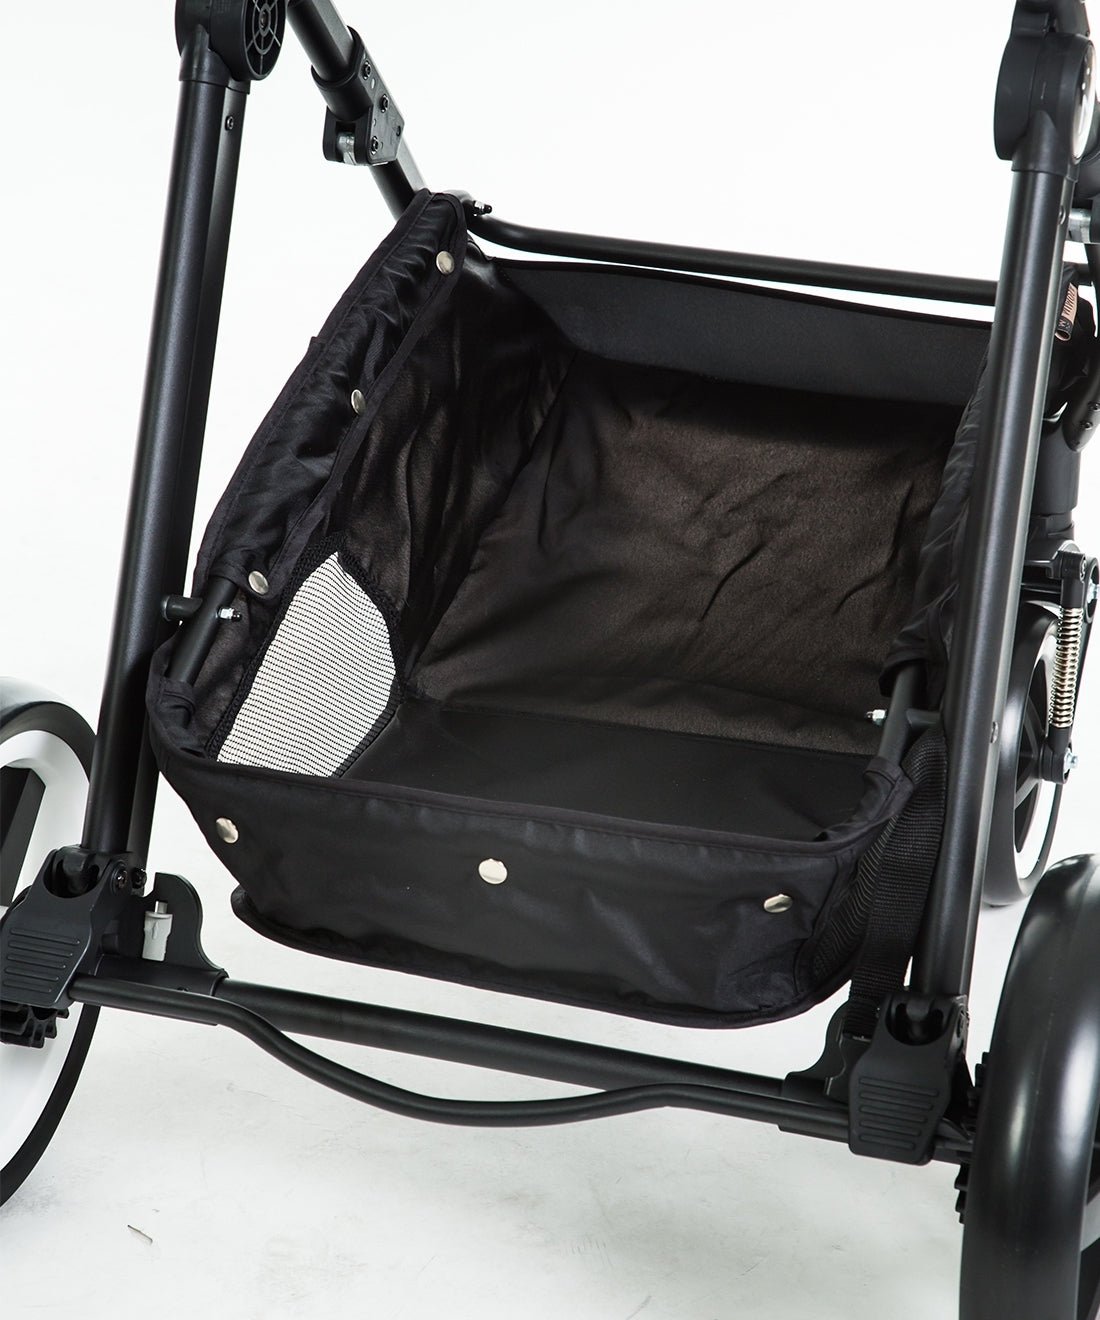 Mimosa First Class Travel System